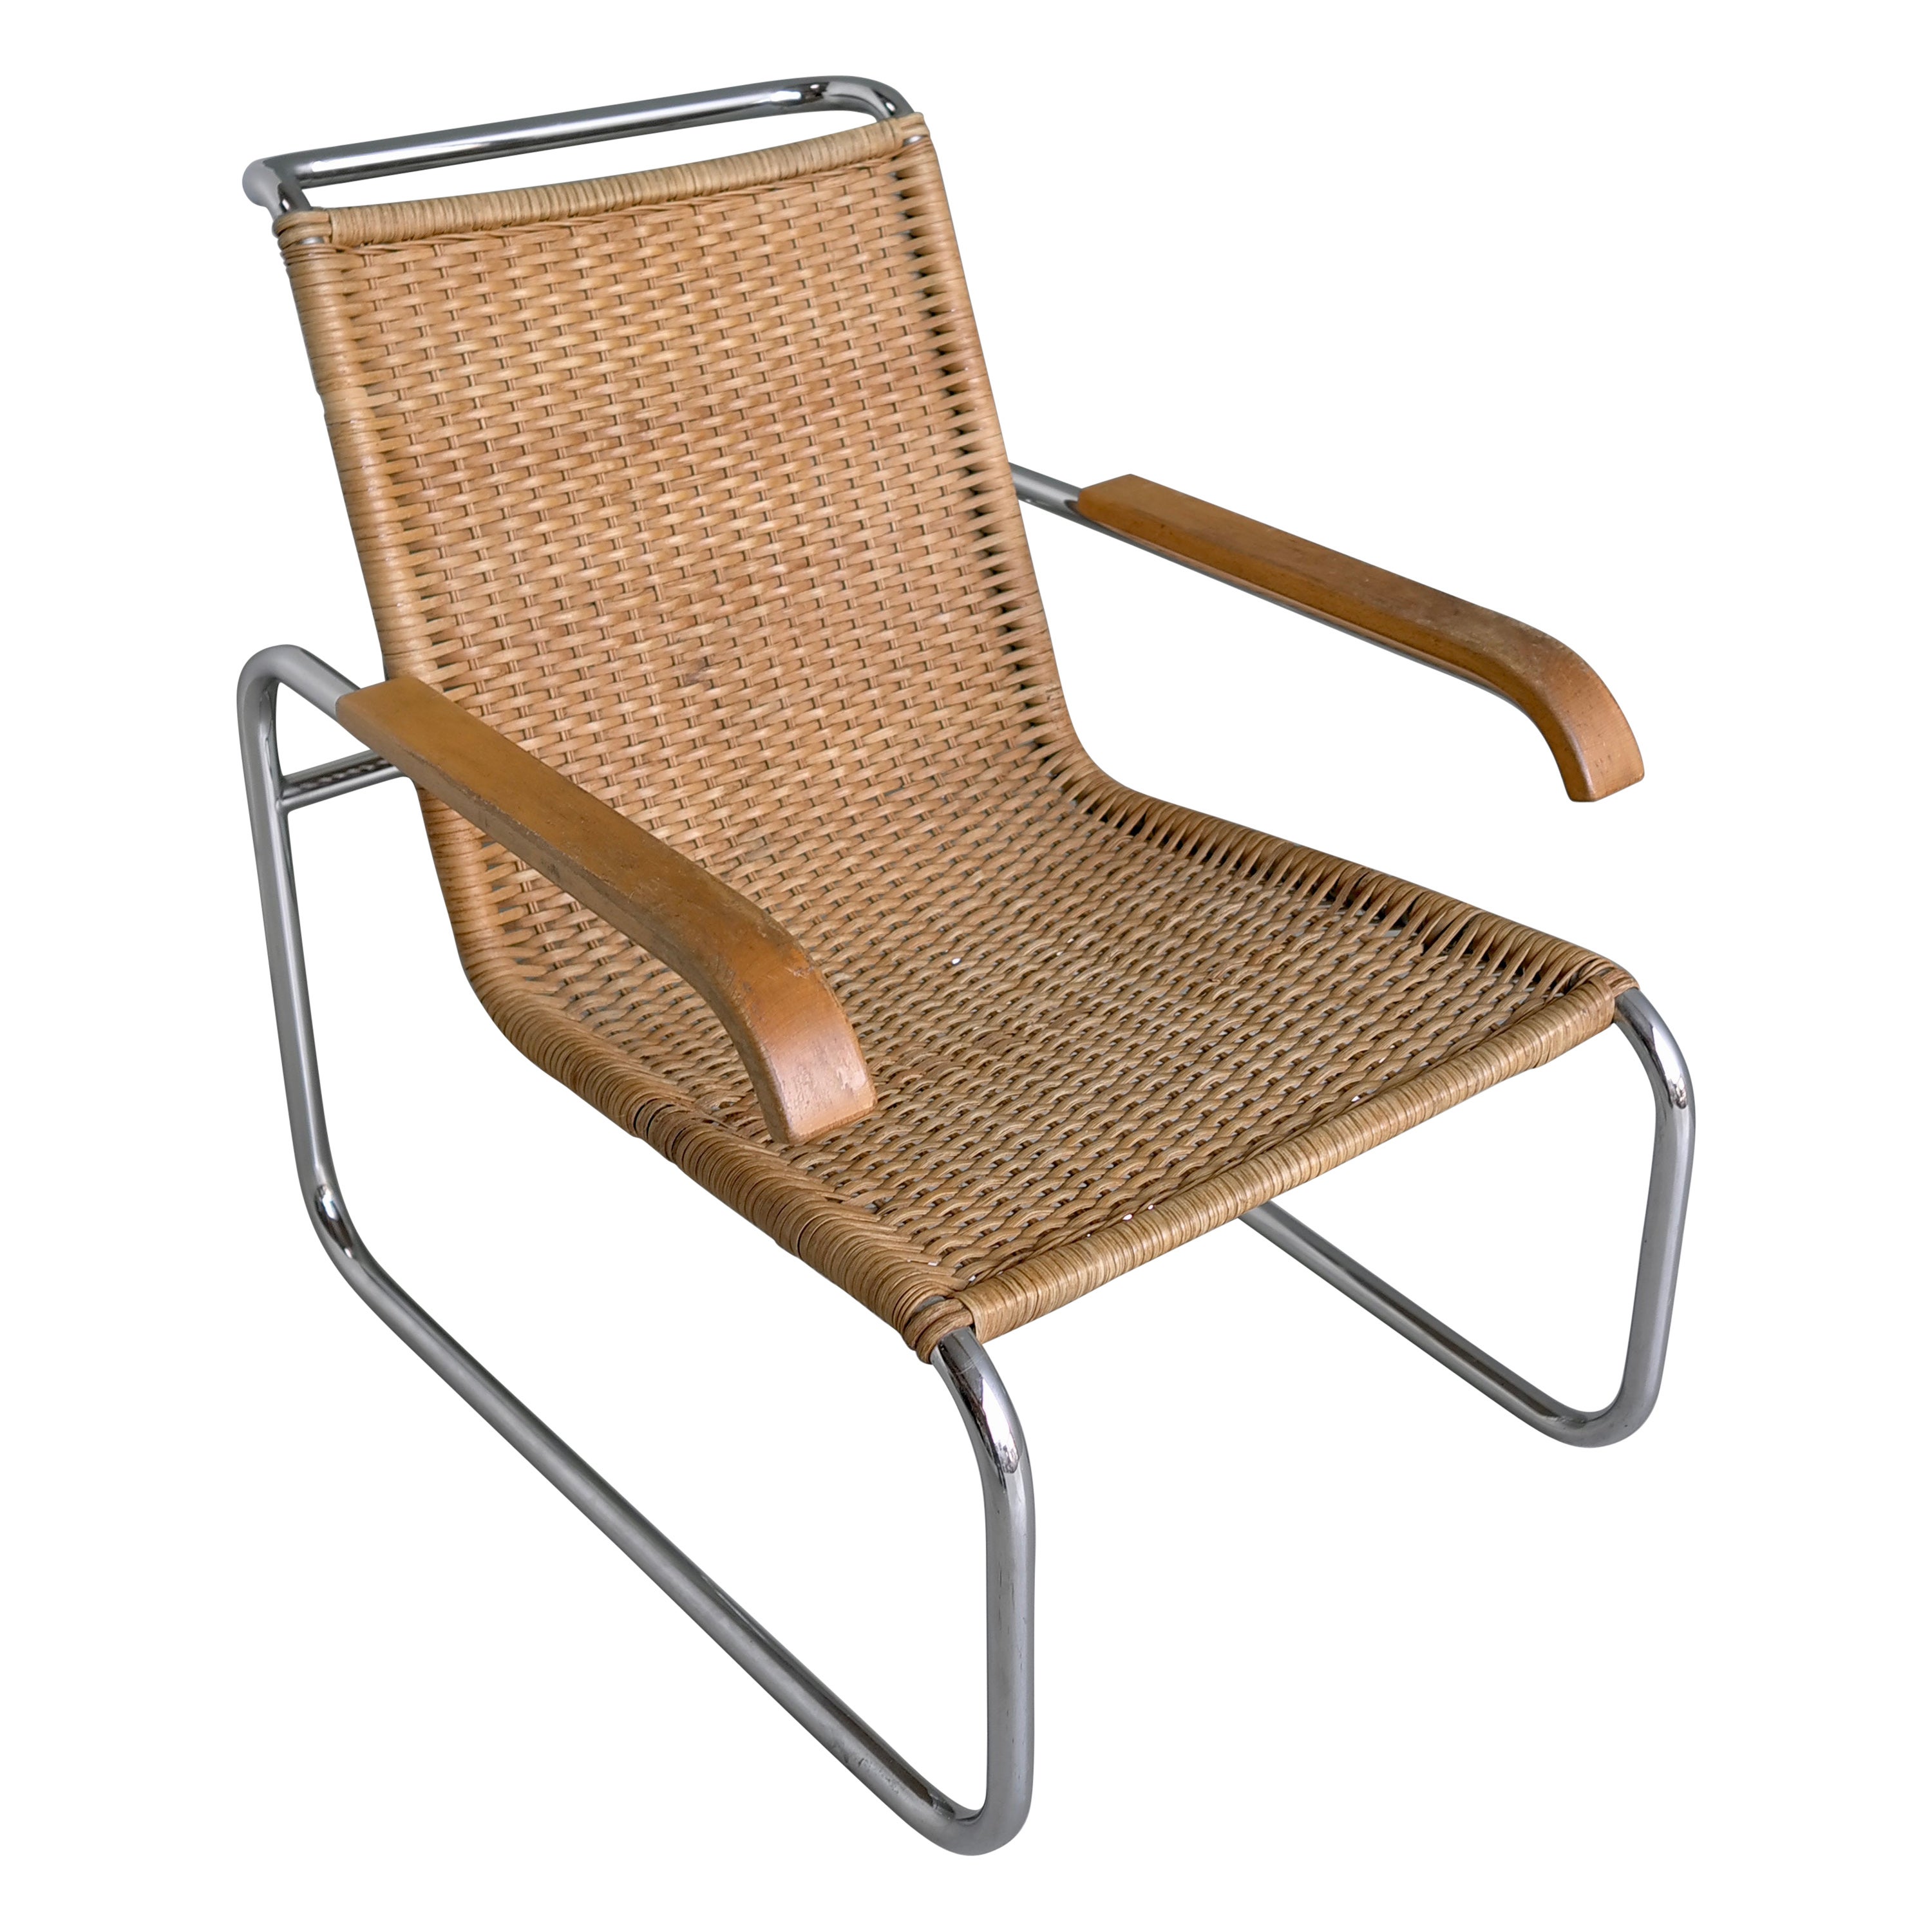 Marcel Breuer B35 Wicker and Chrome Armchair by Thonet 1960's For Sale